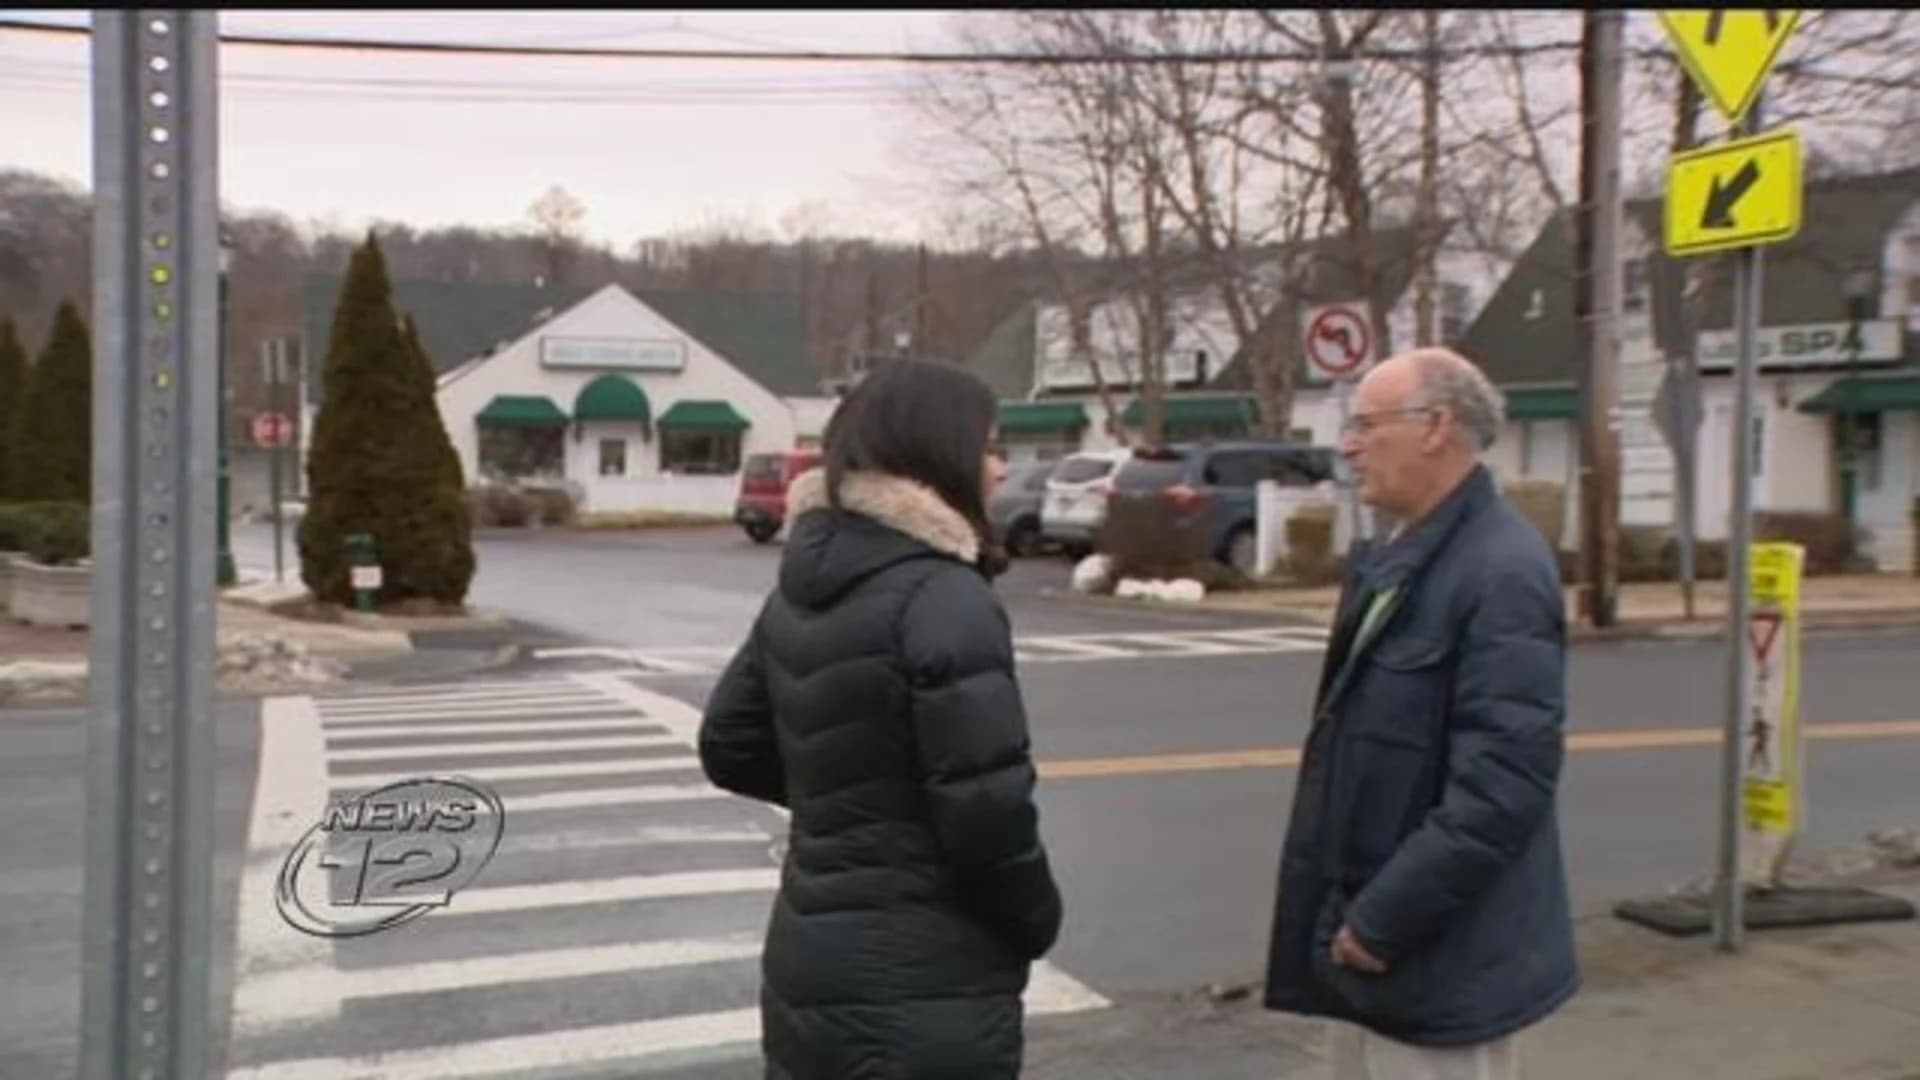 Ardsley accidents initiate push for pedestrian safety measures